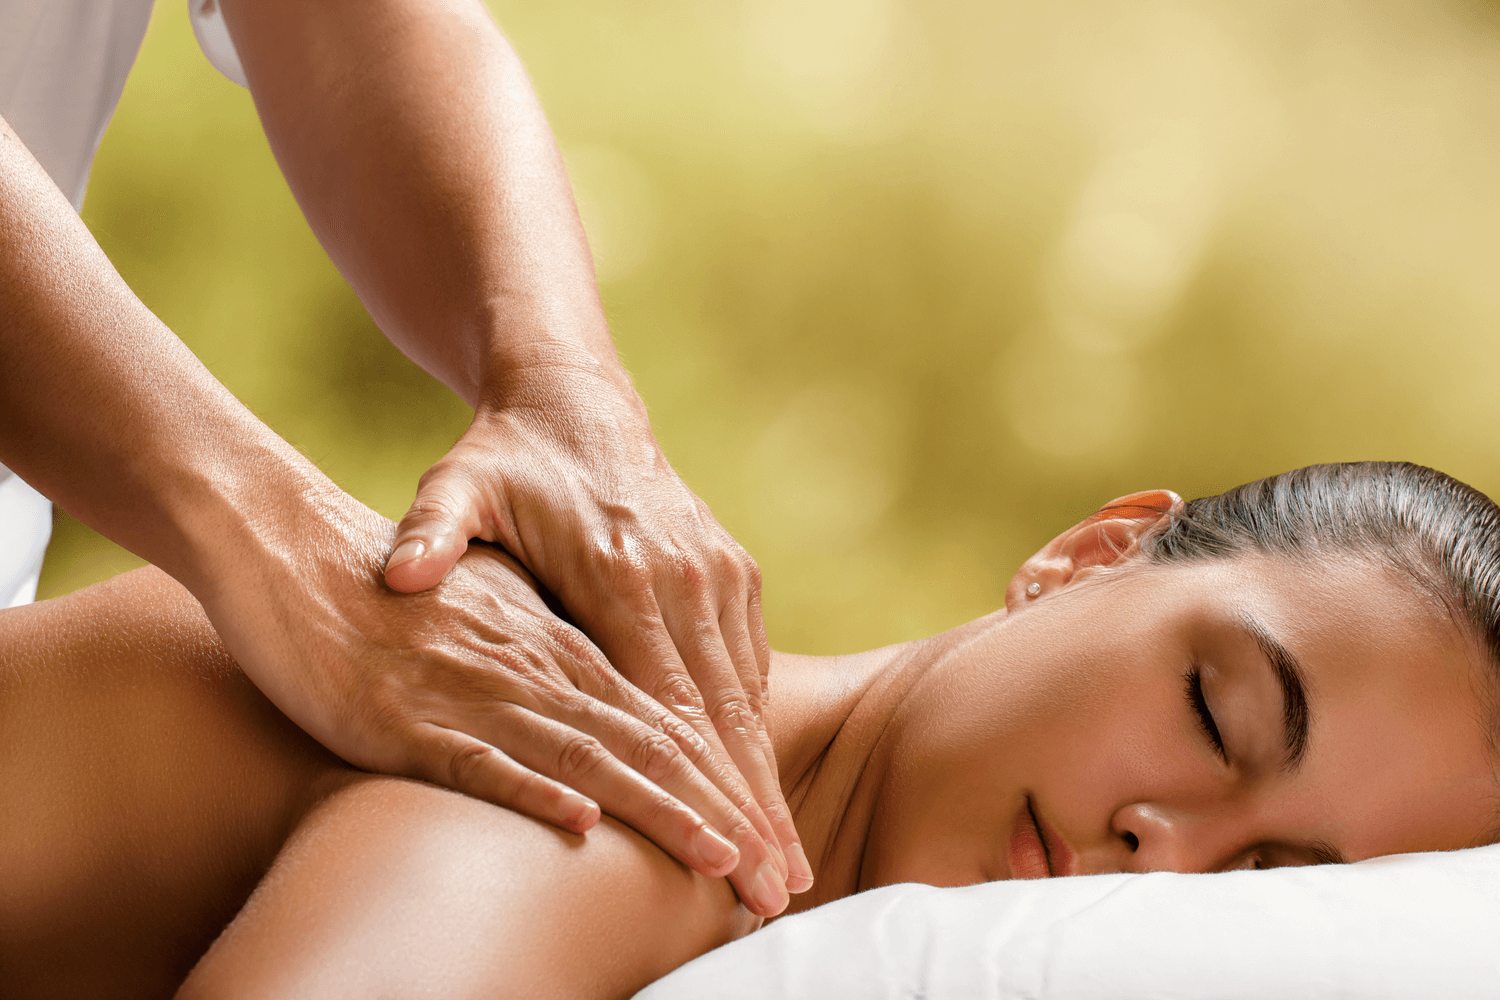 New Mothers and Precautions During Oil Massages